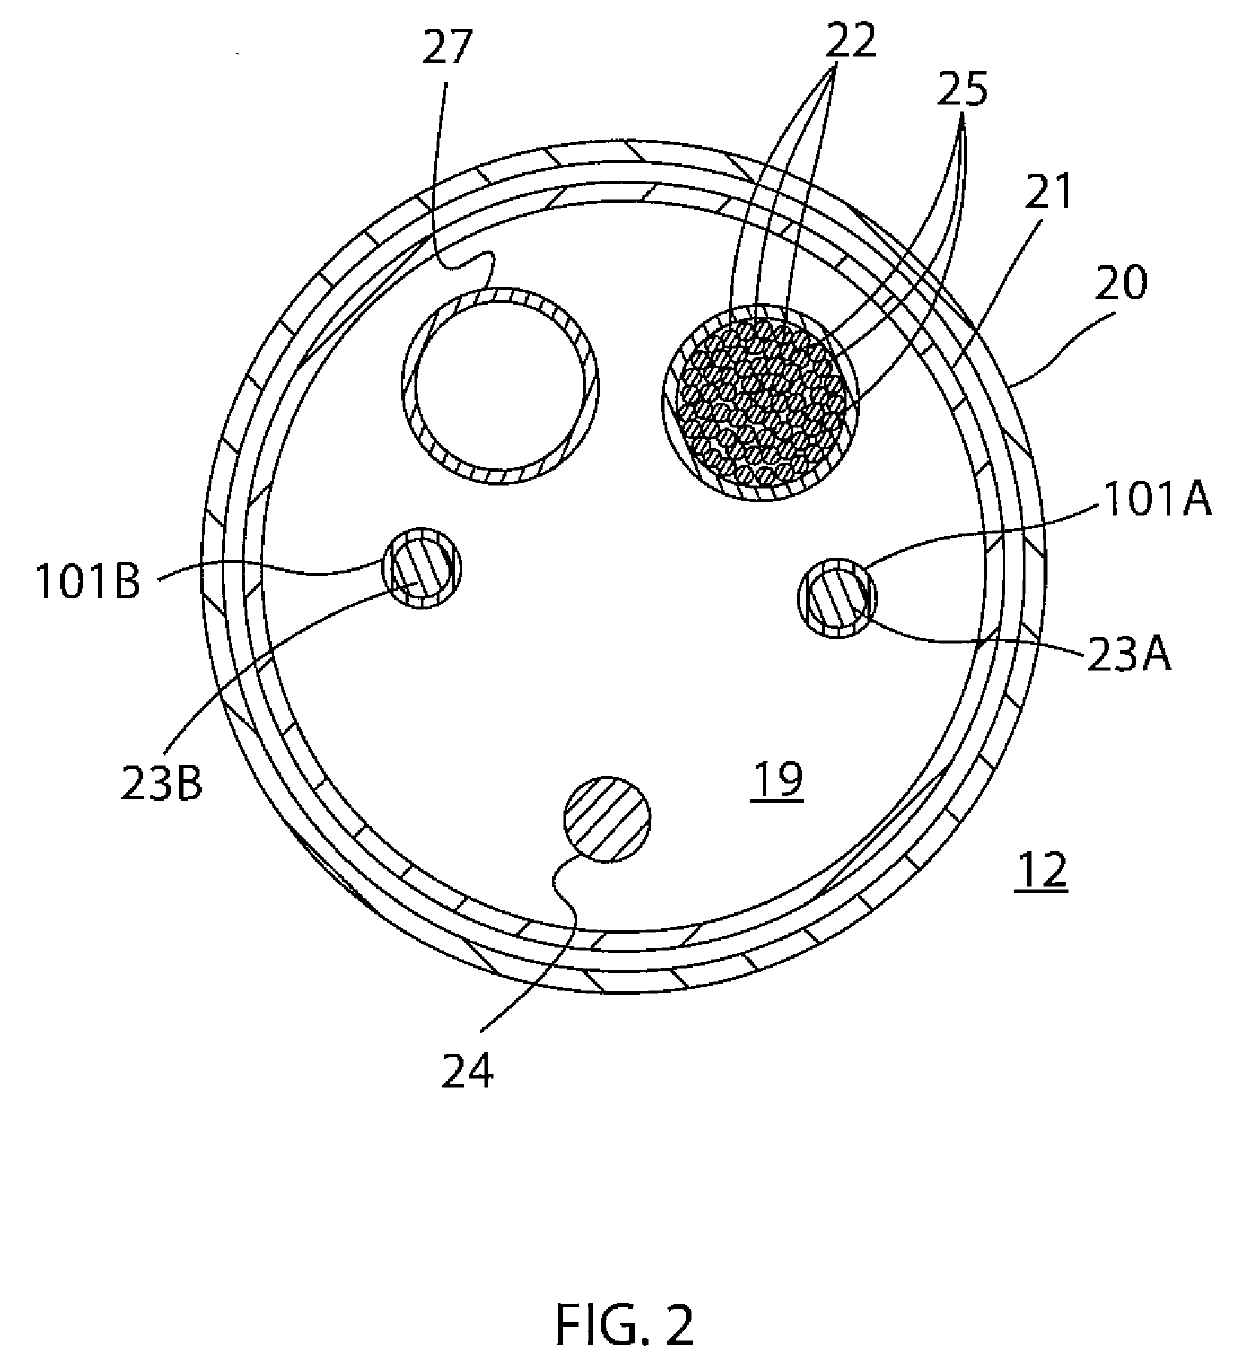 Catheter with electrode spine assembly having preformed configurations for improved tissue contact